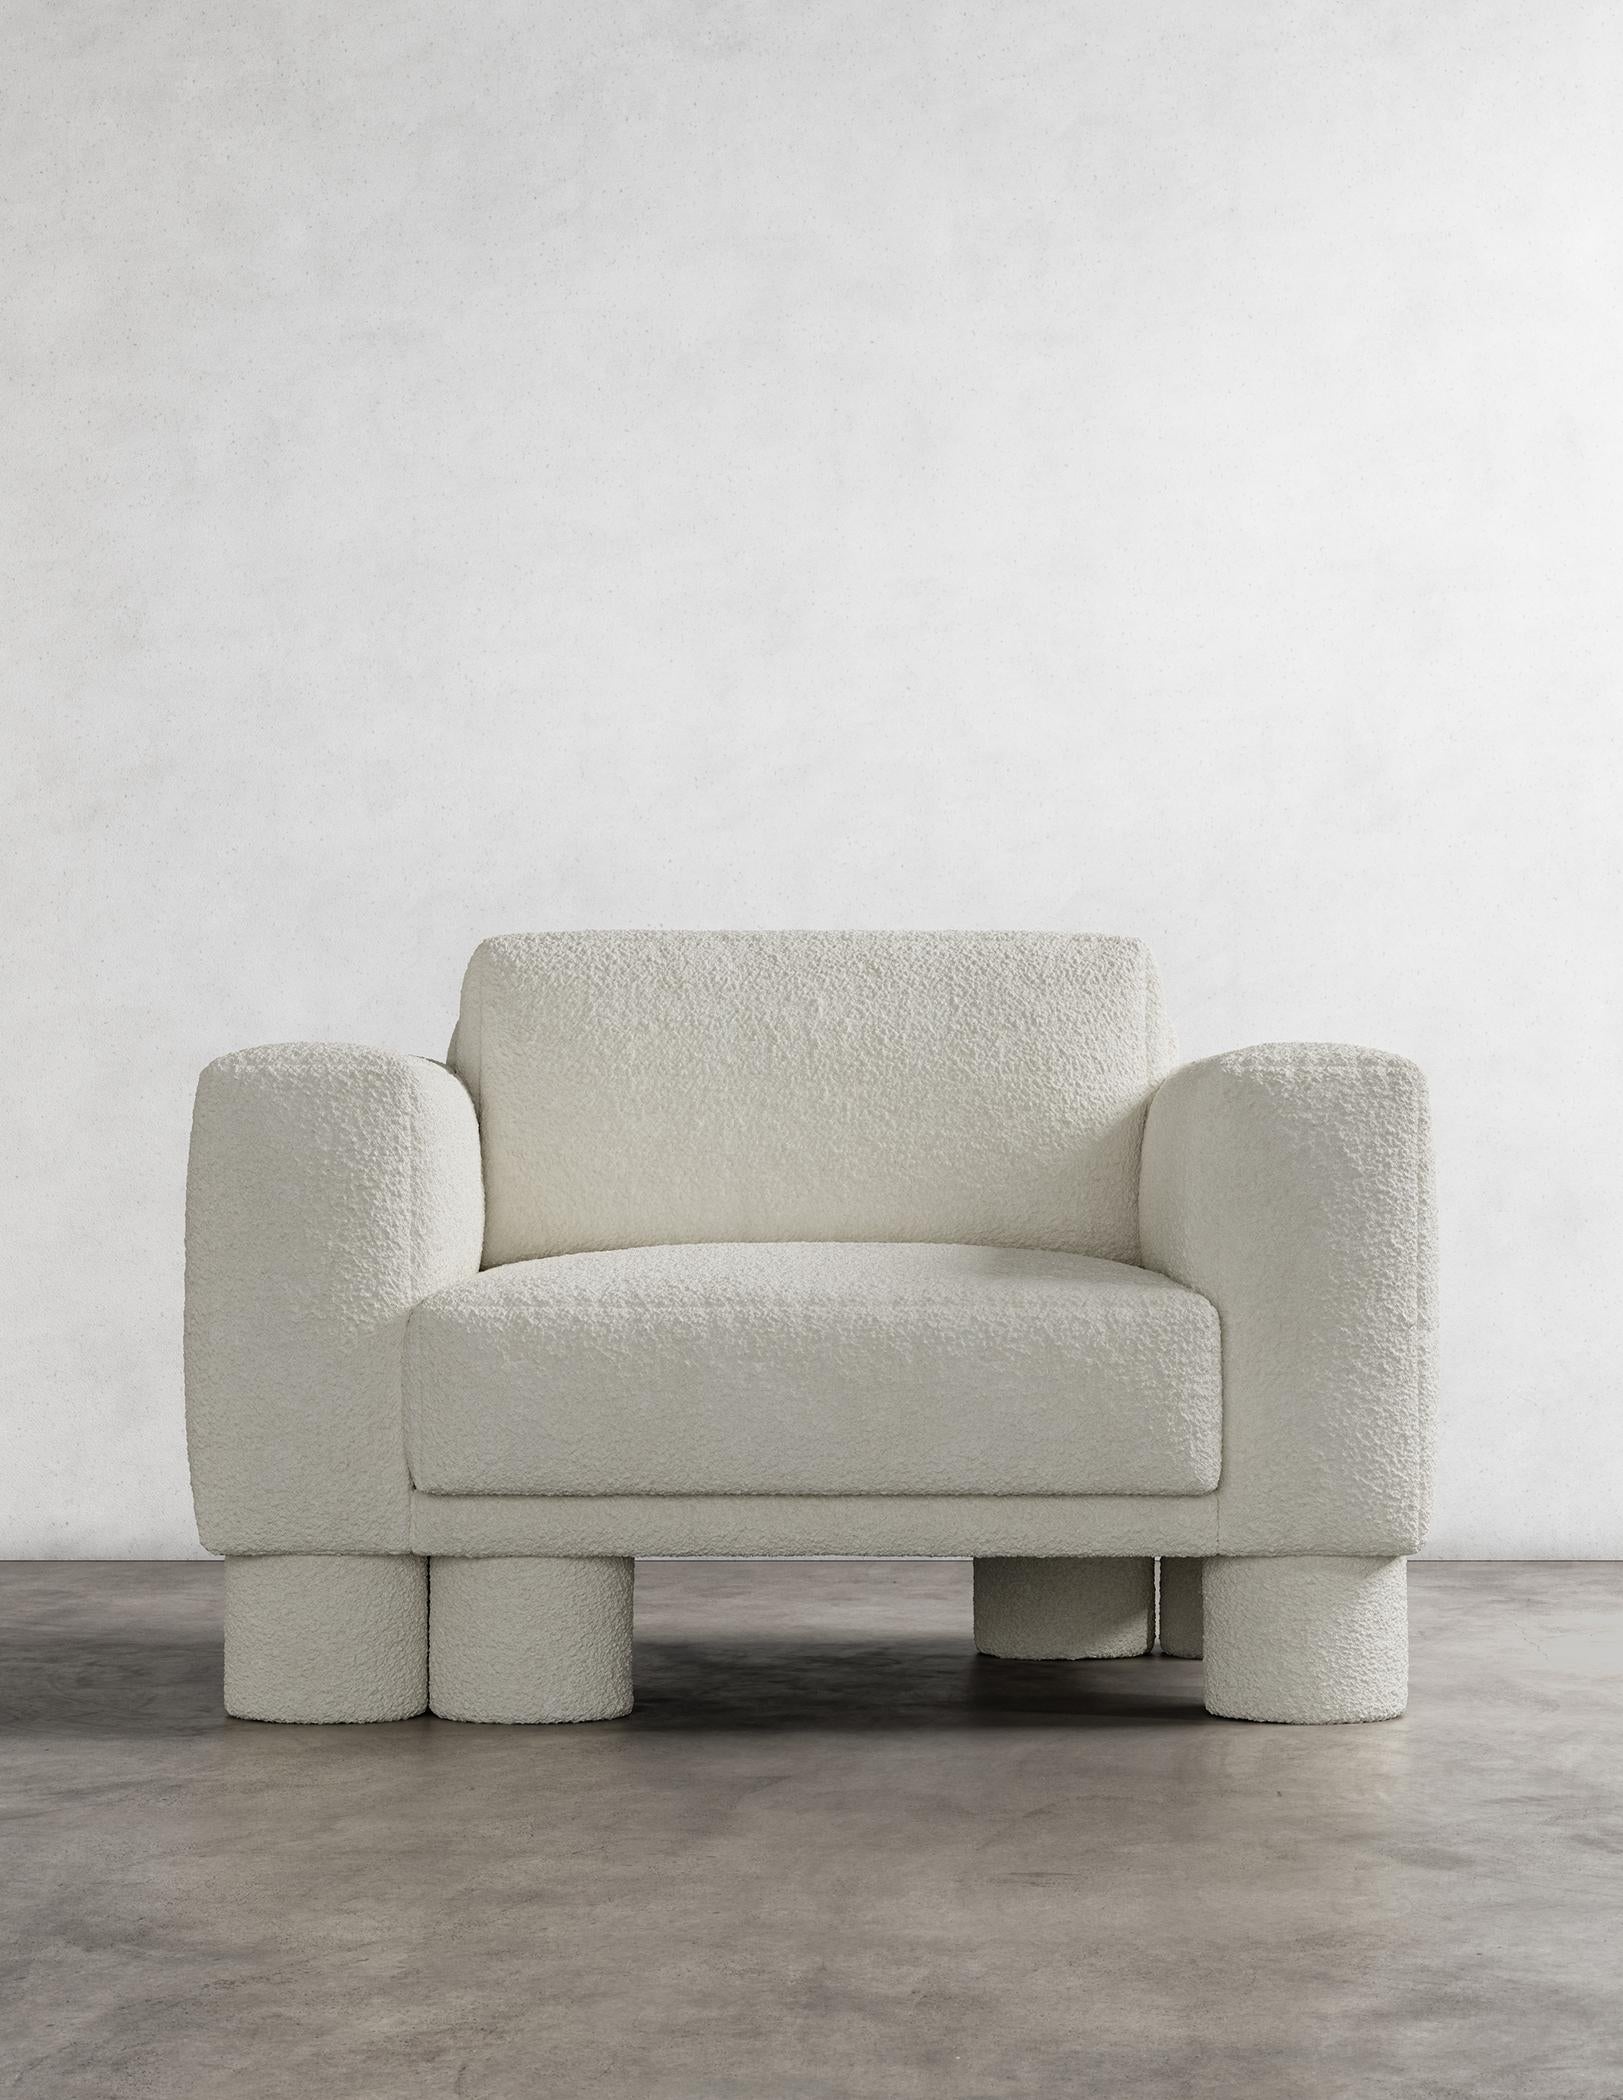 The Pillar Chair is a stunning piece of furniture with a unique and captivating design. It is characterized by layered, asymmetrical design elements that create a sense of sophistication and simplicity. The deliberate imbalance in these design